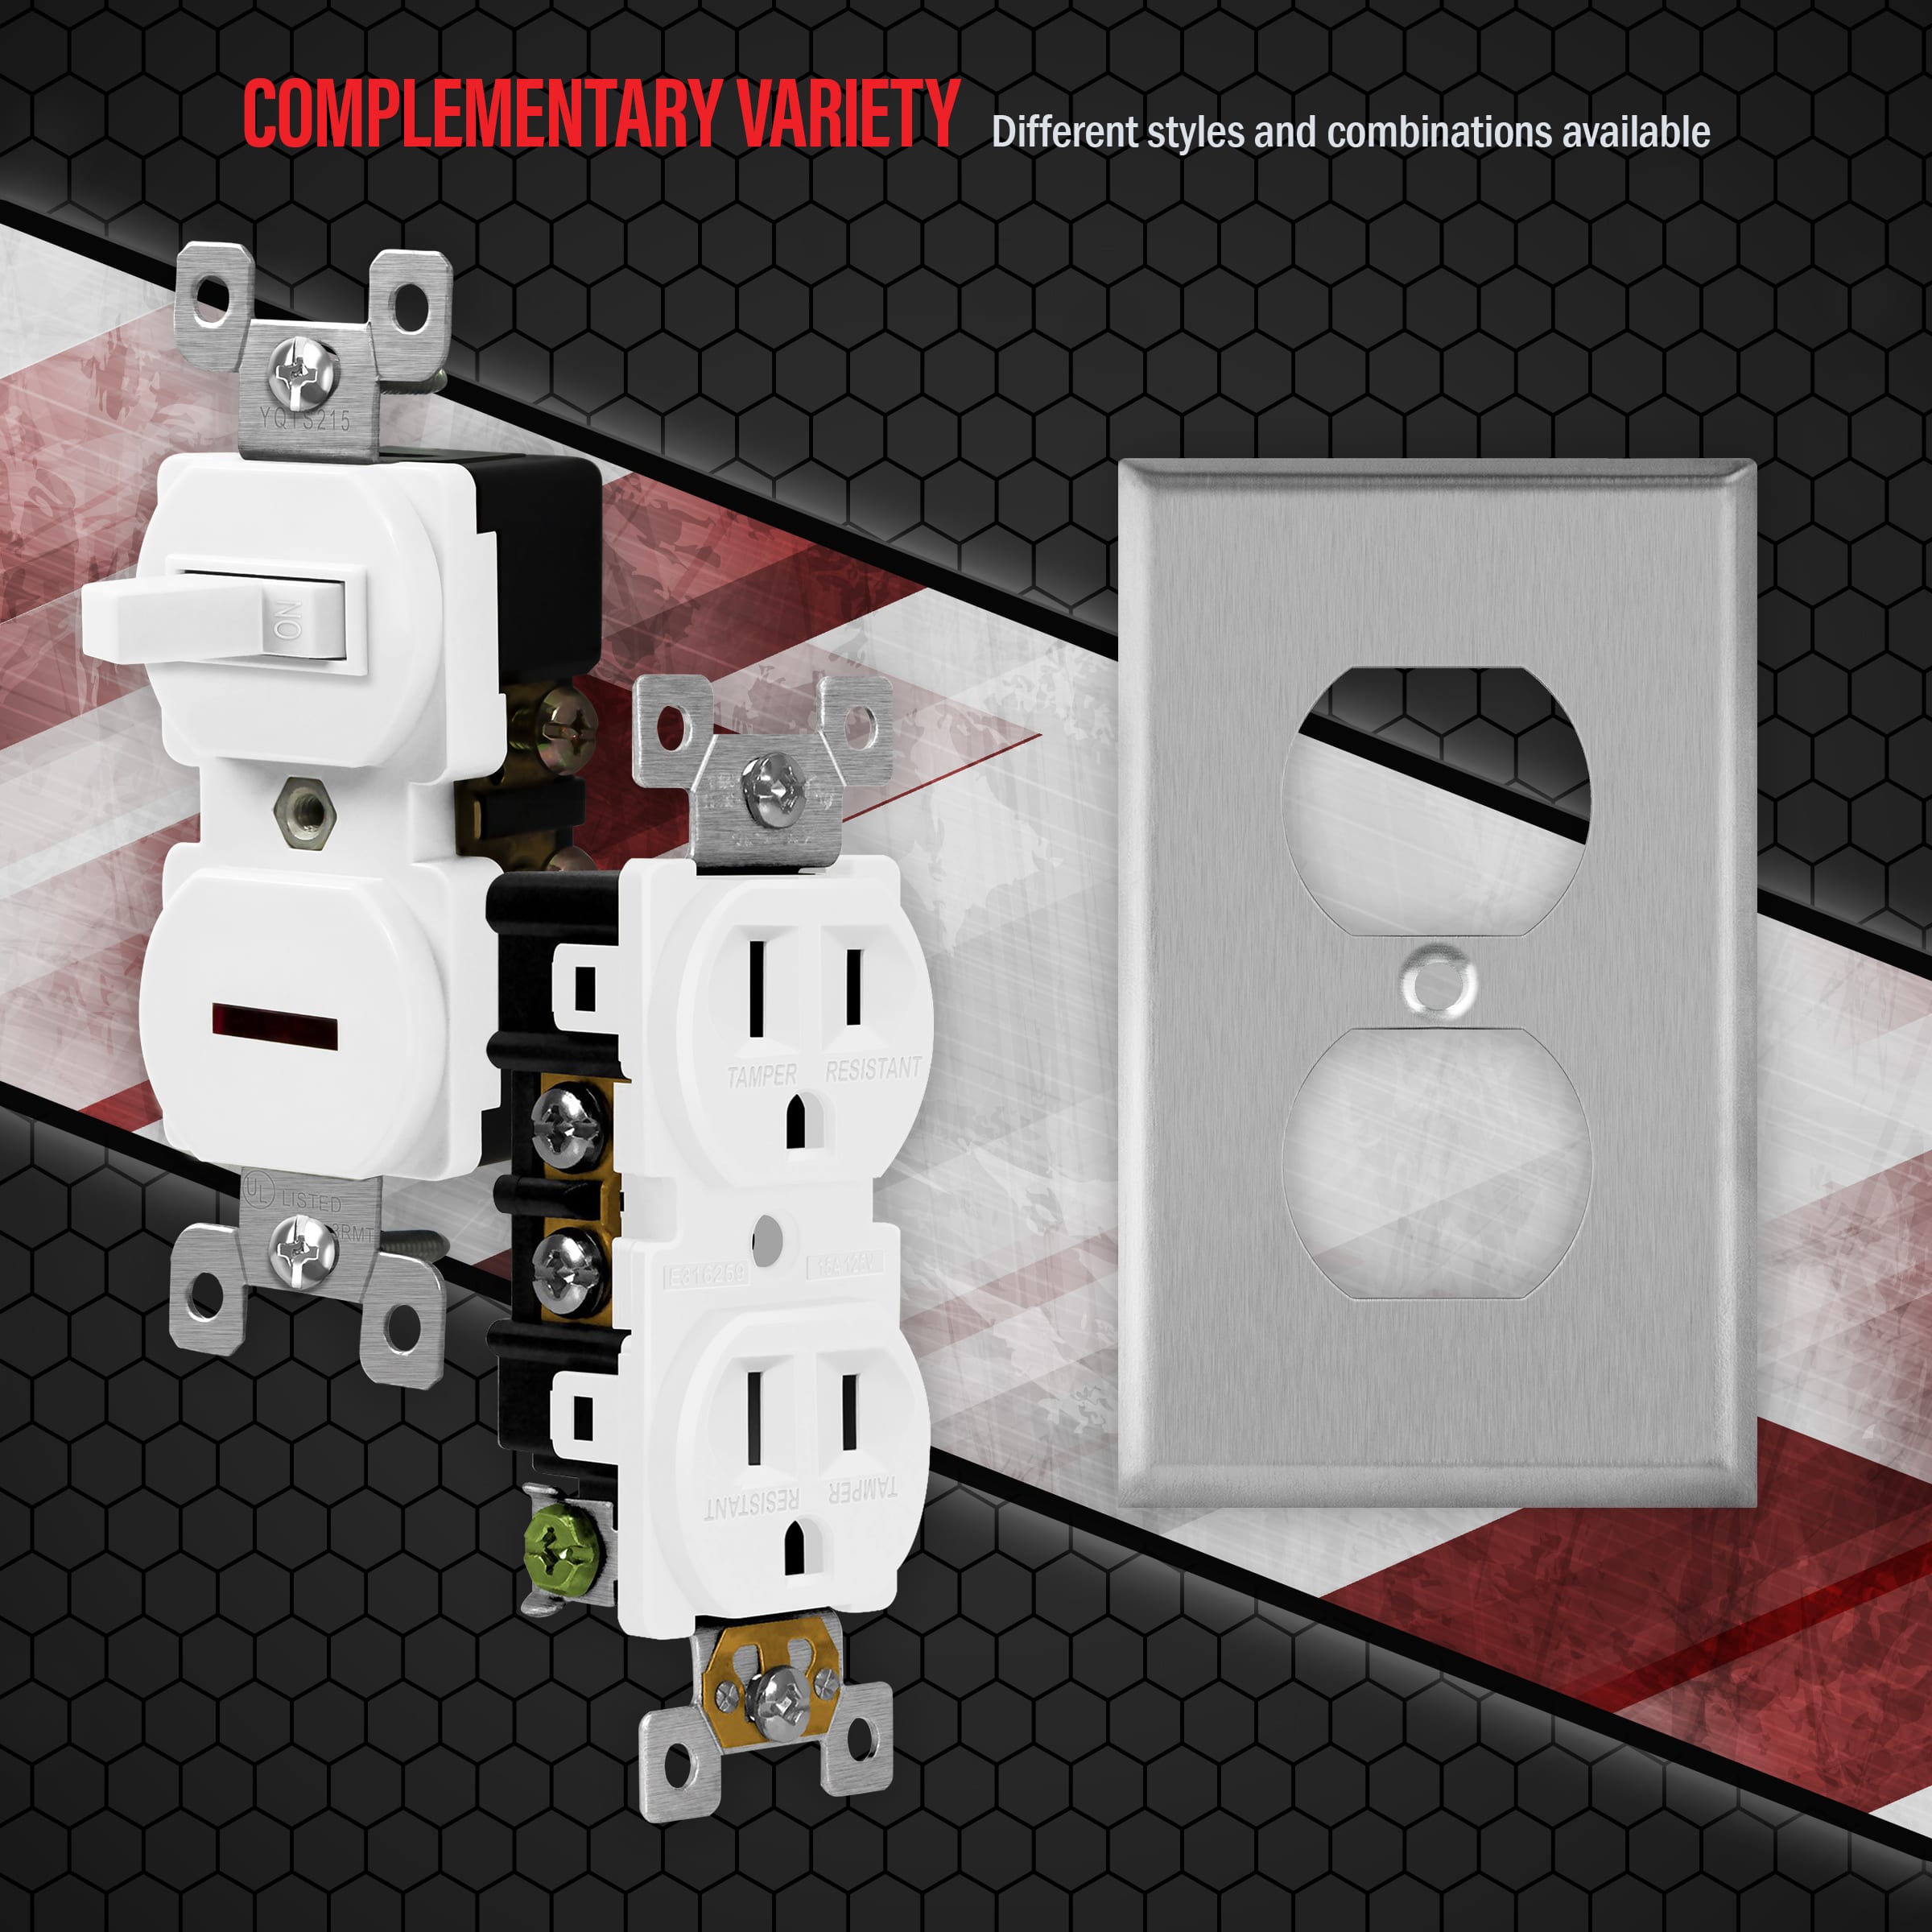 1-Gang Stainless Steel Duplex Outlet Wall Plate